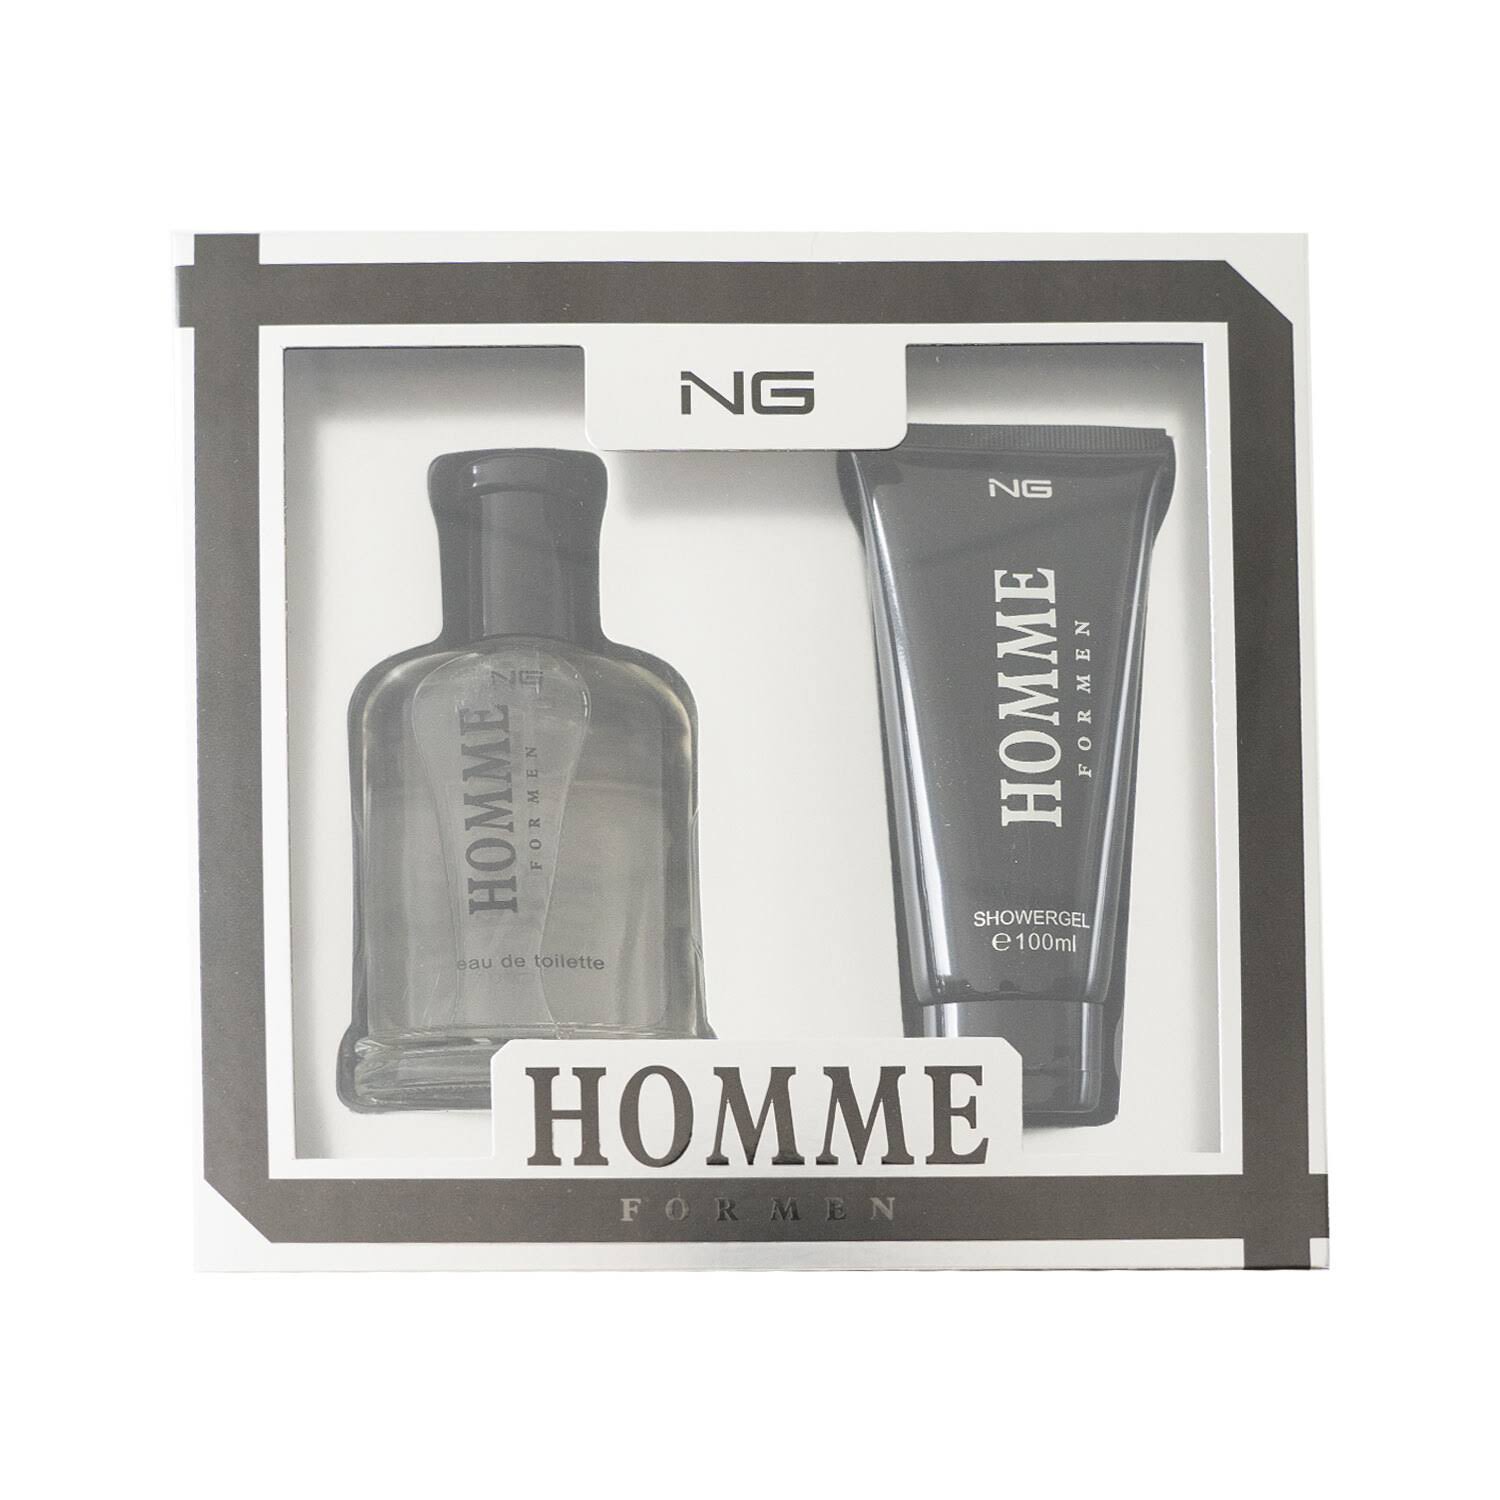 NG Aftershave Giftset Homme For Men by dpharmacy